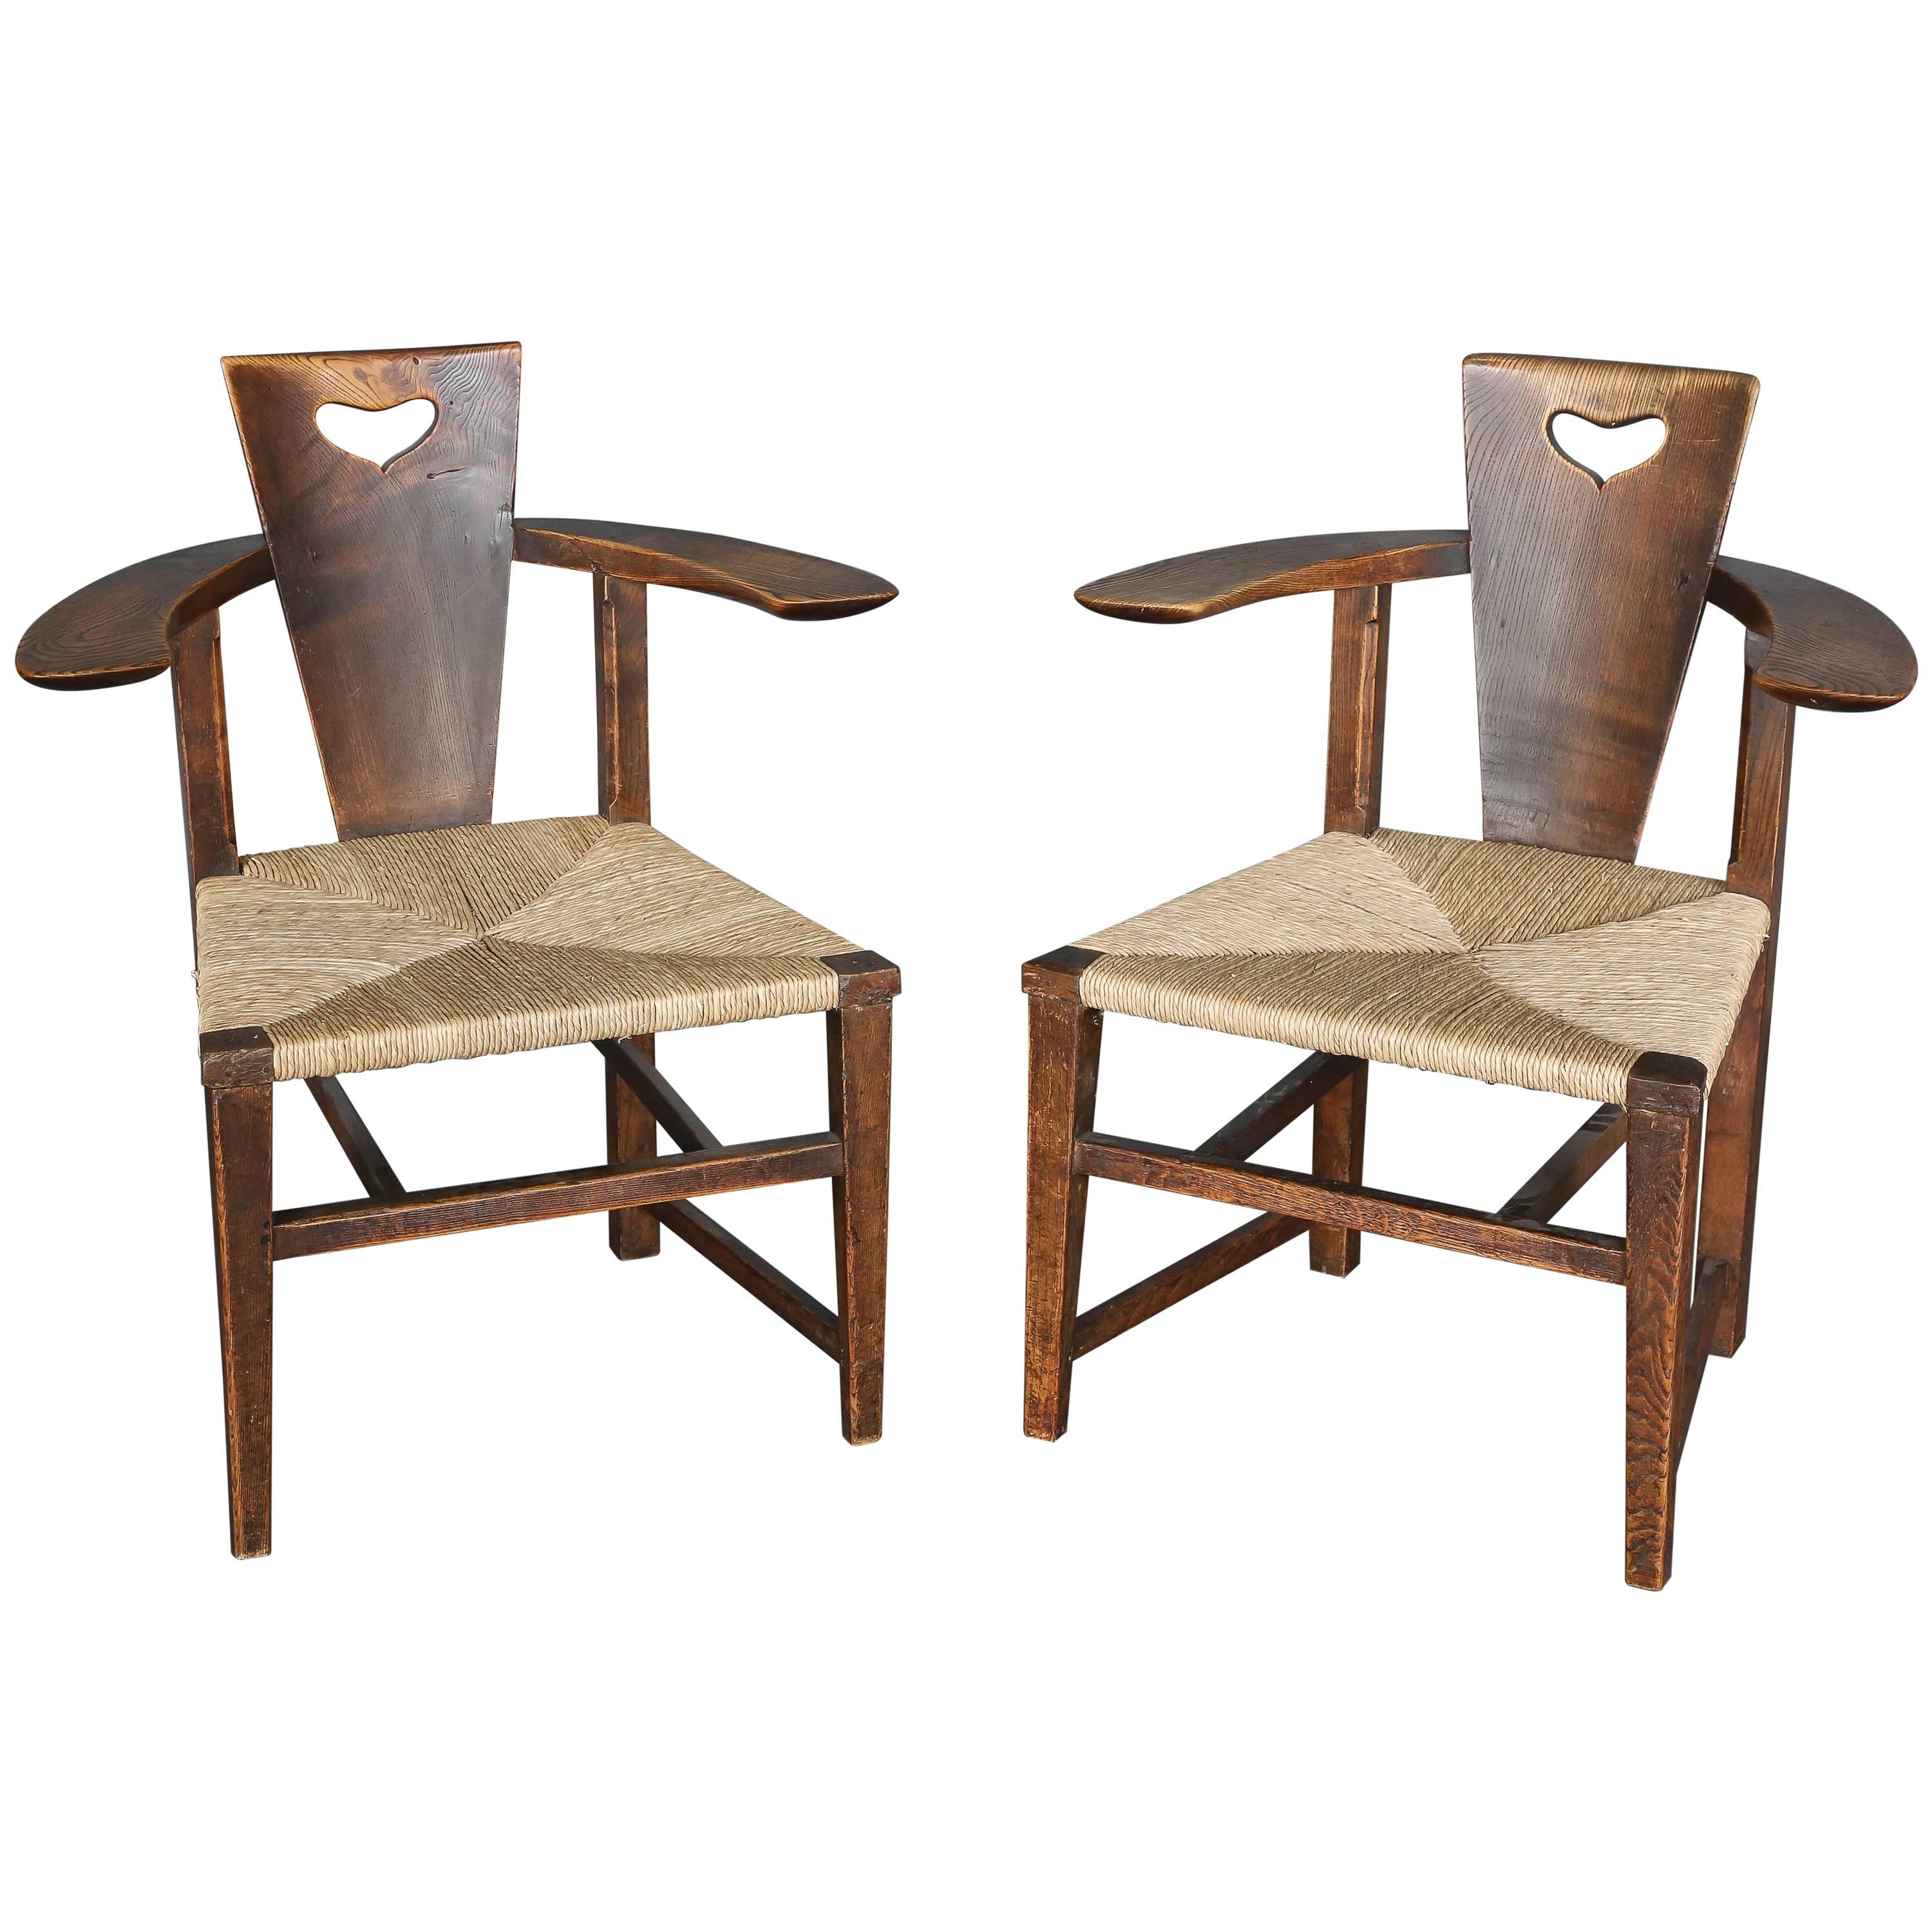 Antique 19th Century Ash Abingwood Chairs by George Walton